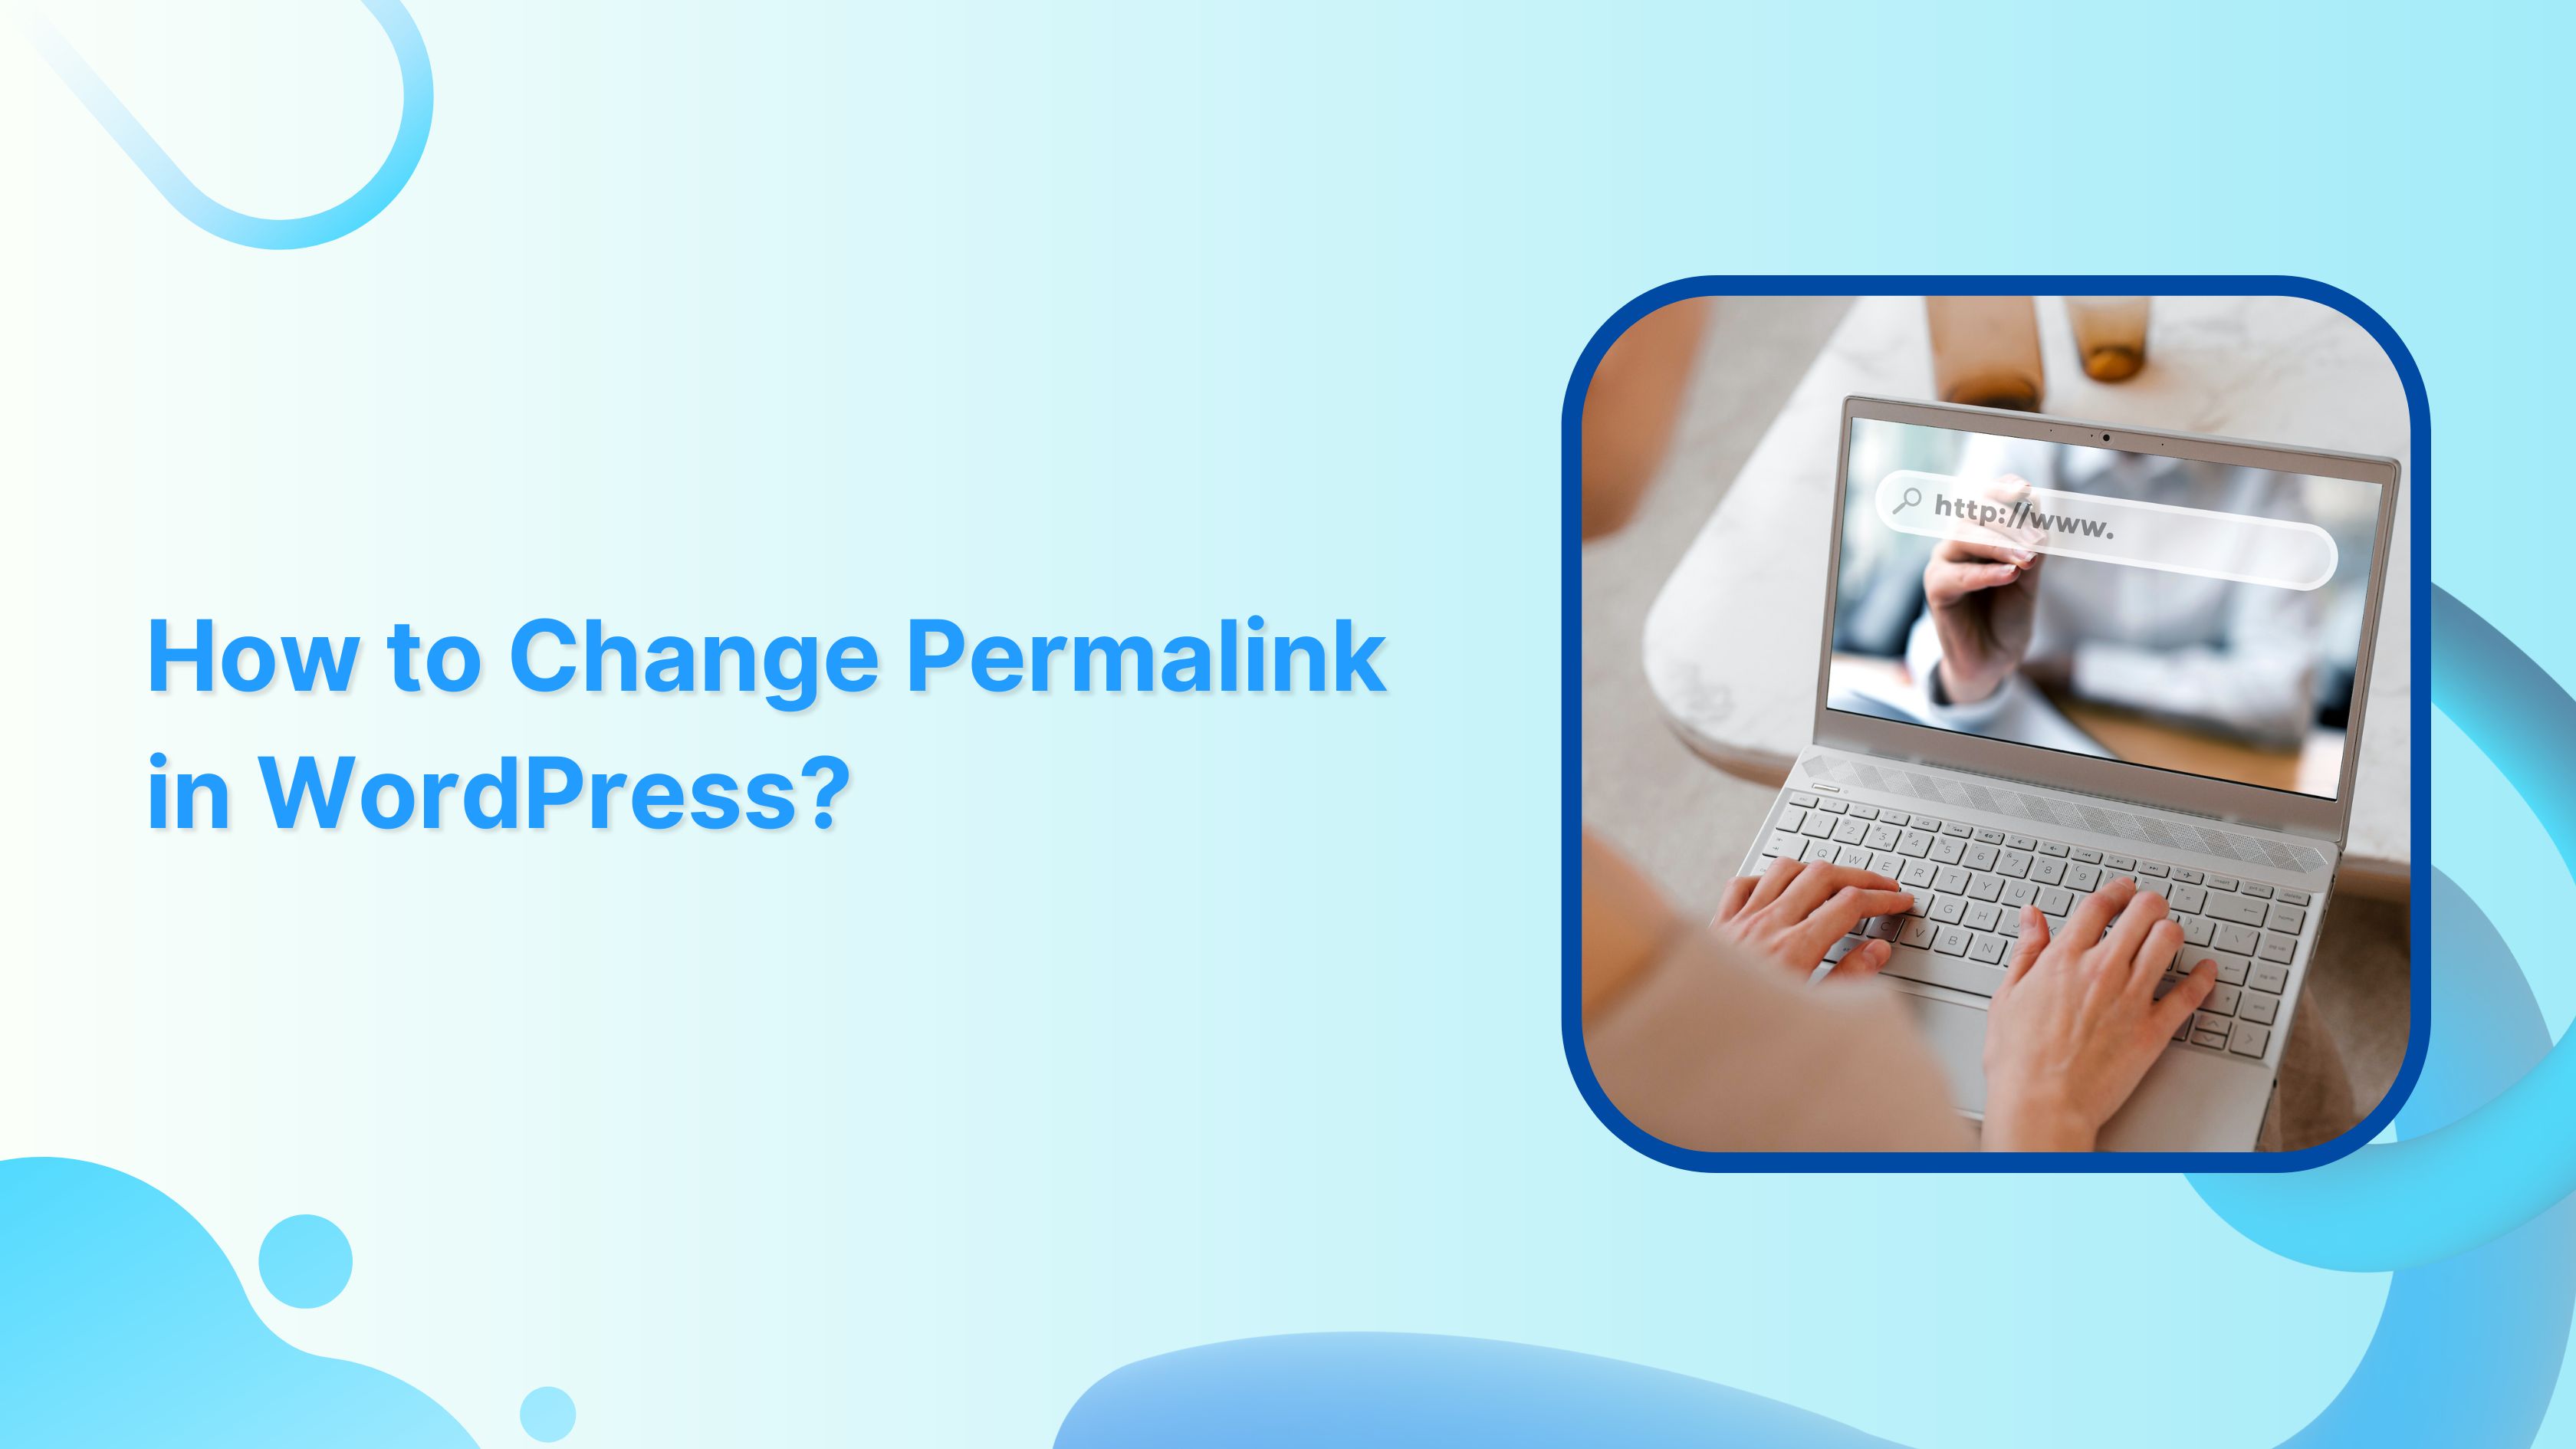 How to Change Permalink in WordPress: Step-by-Step